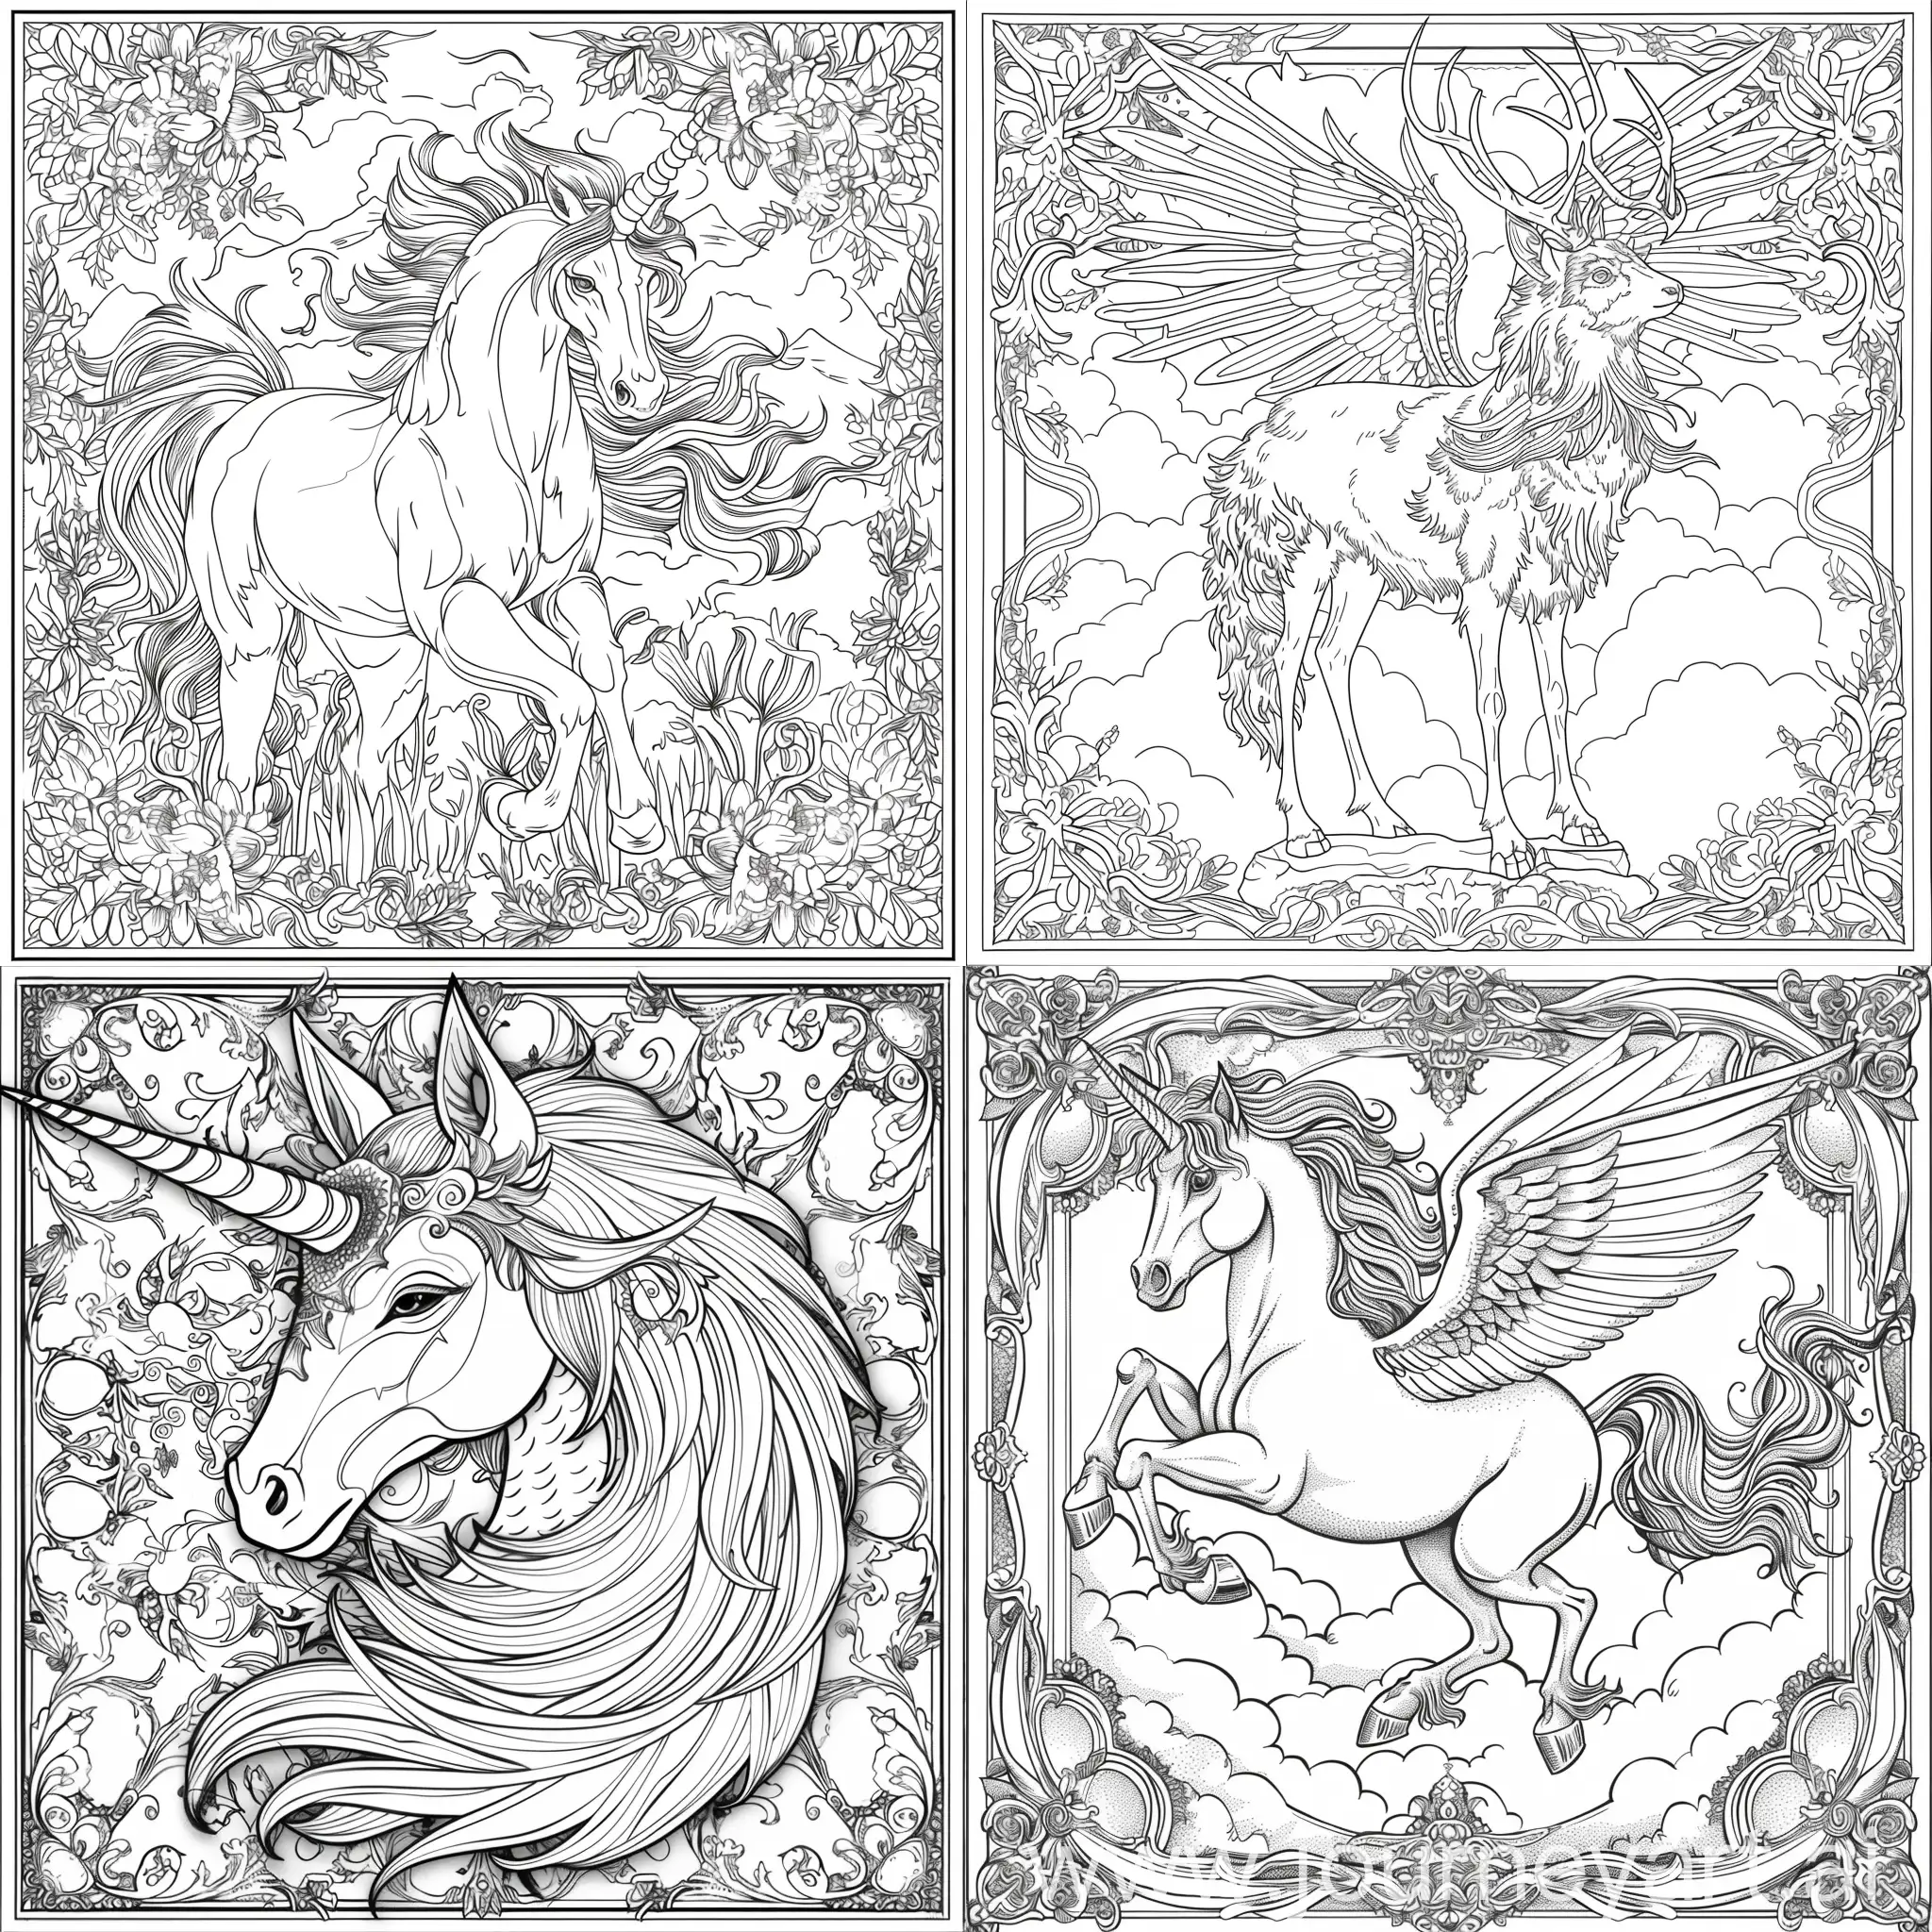 Mystical-Creatures-Coloring-Book-80-Pages-of-Fantasy-Art-for-All-Ages